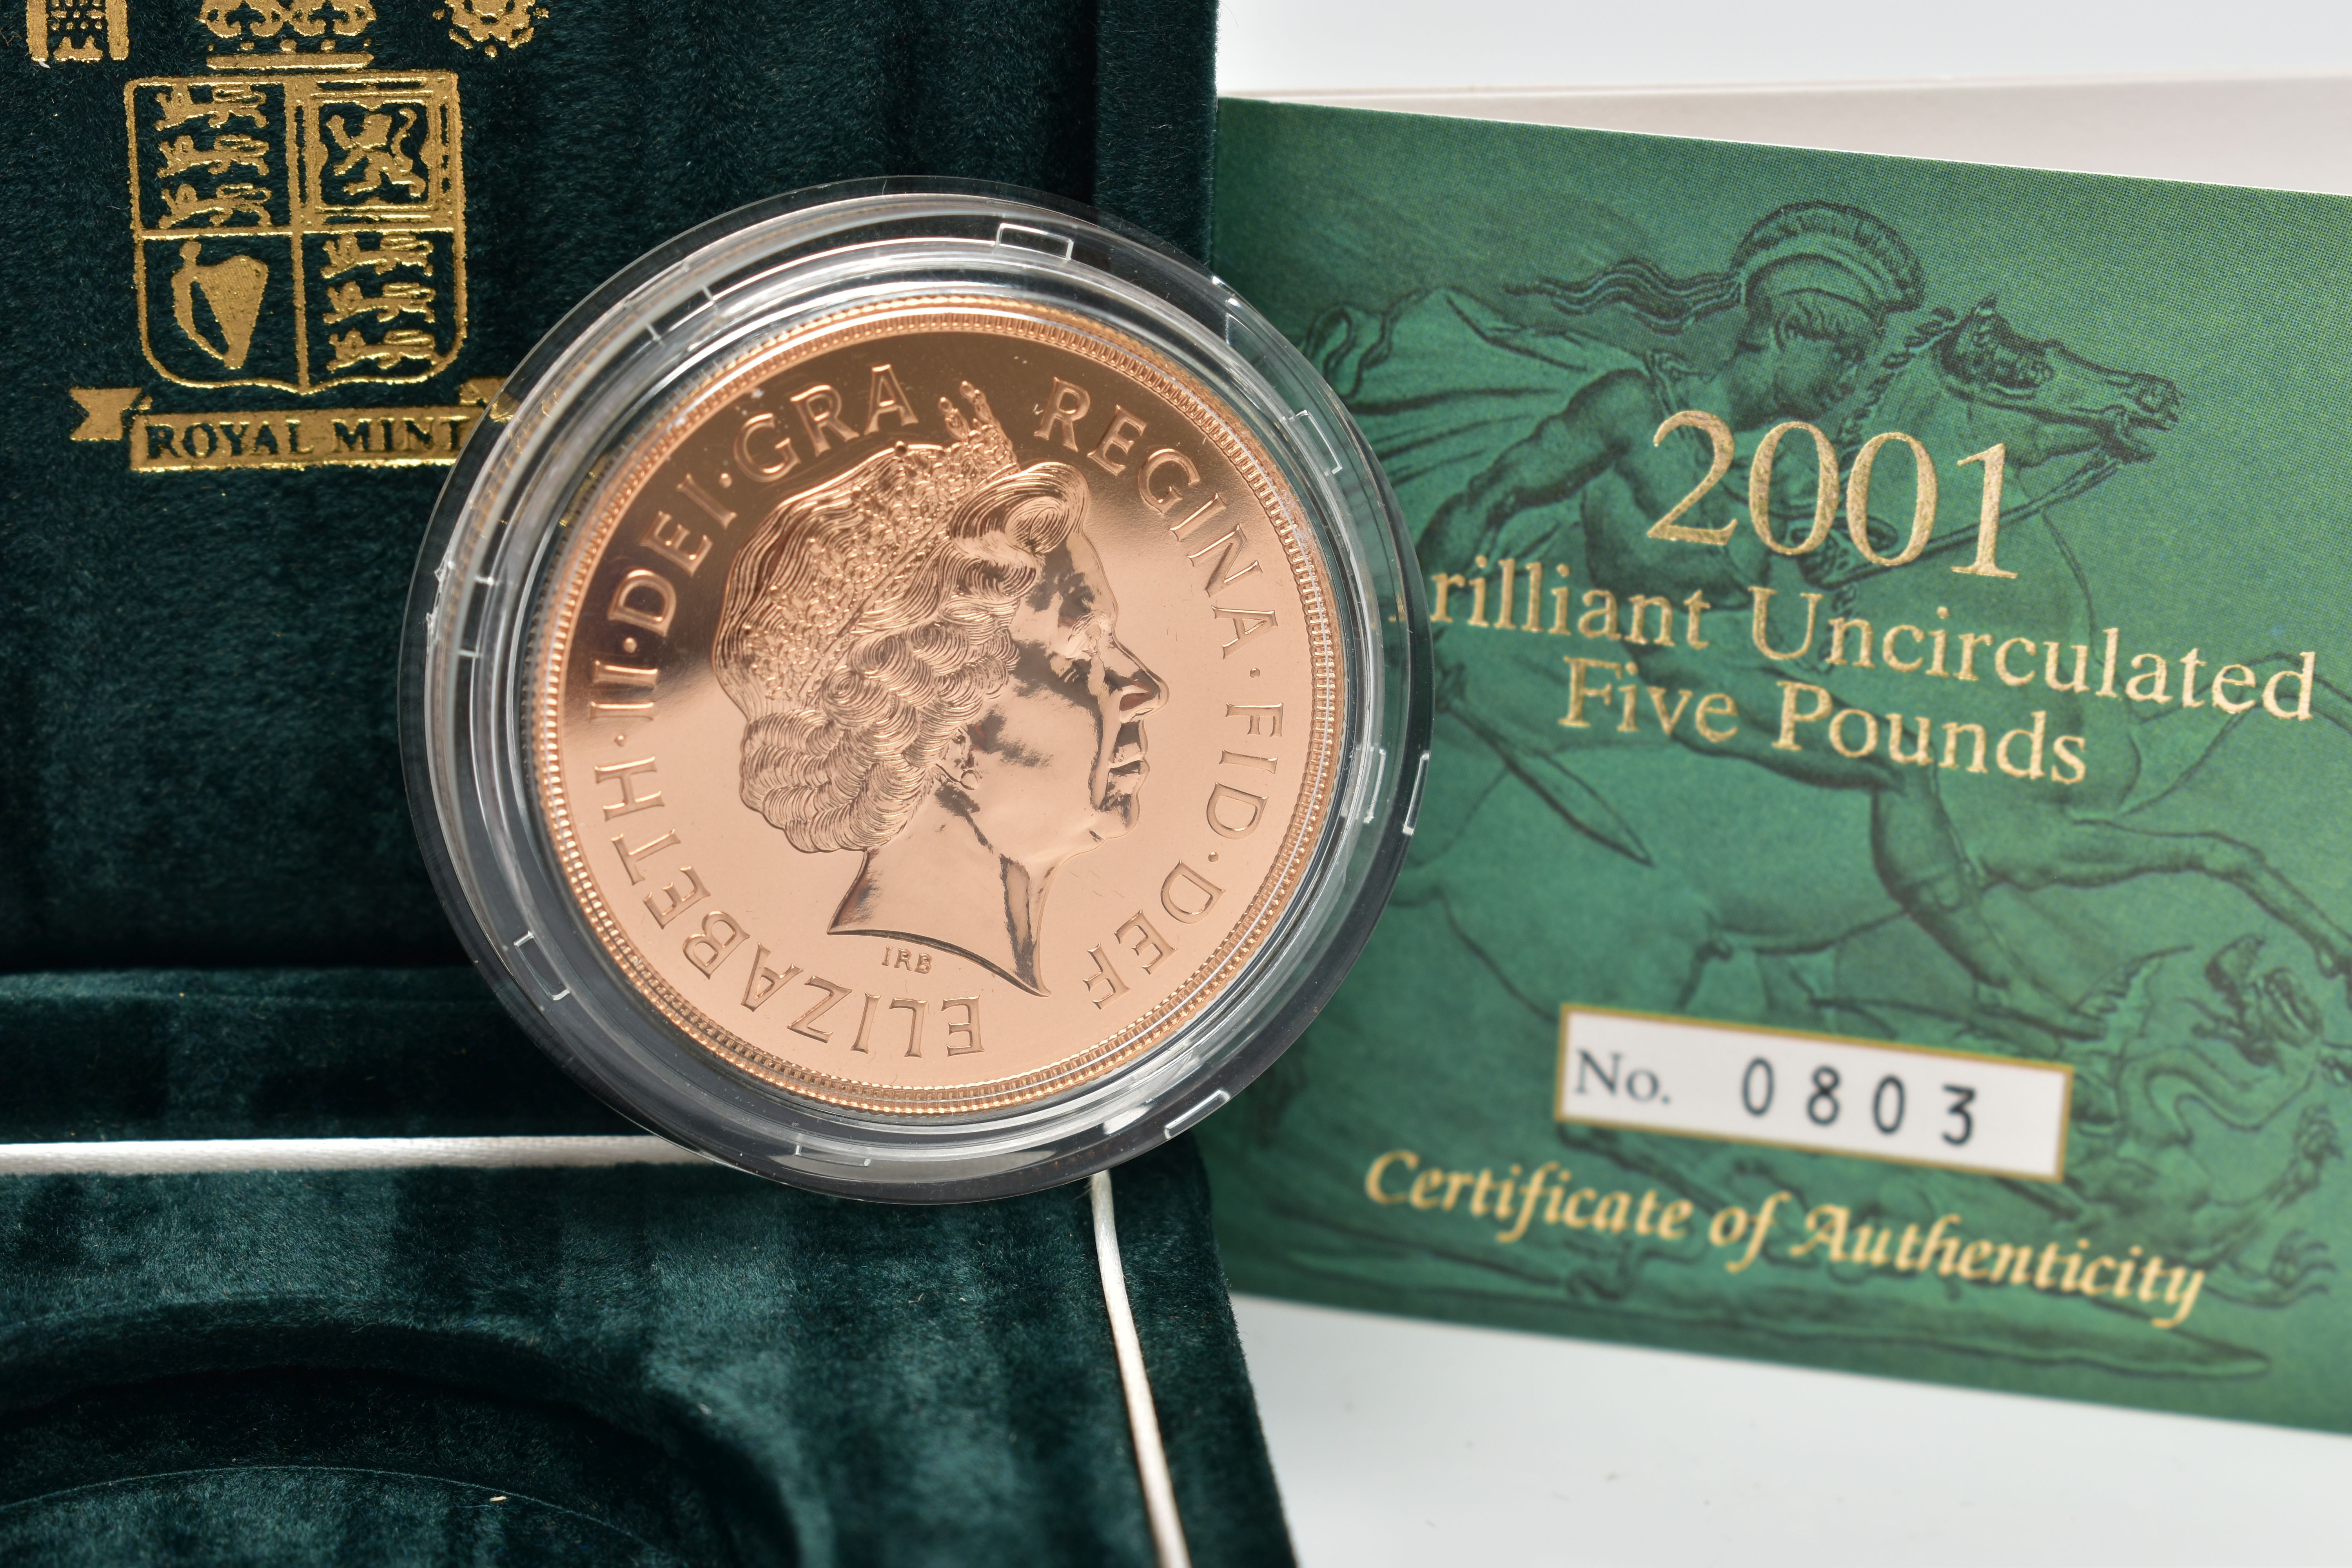 A ROYAL MINT UNITED KINDOM 2001 BRILLIANT UNCIRCULATED GOLD FIVE POUND COIN, 22 carat gold, 39.94 - Image 2 of 2